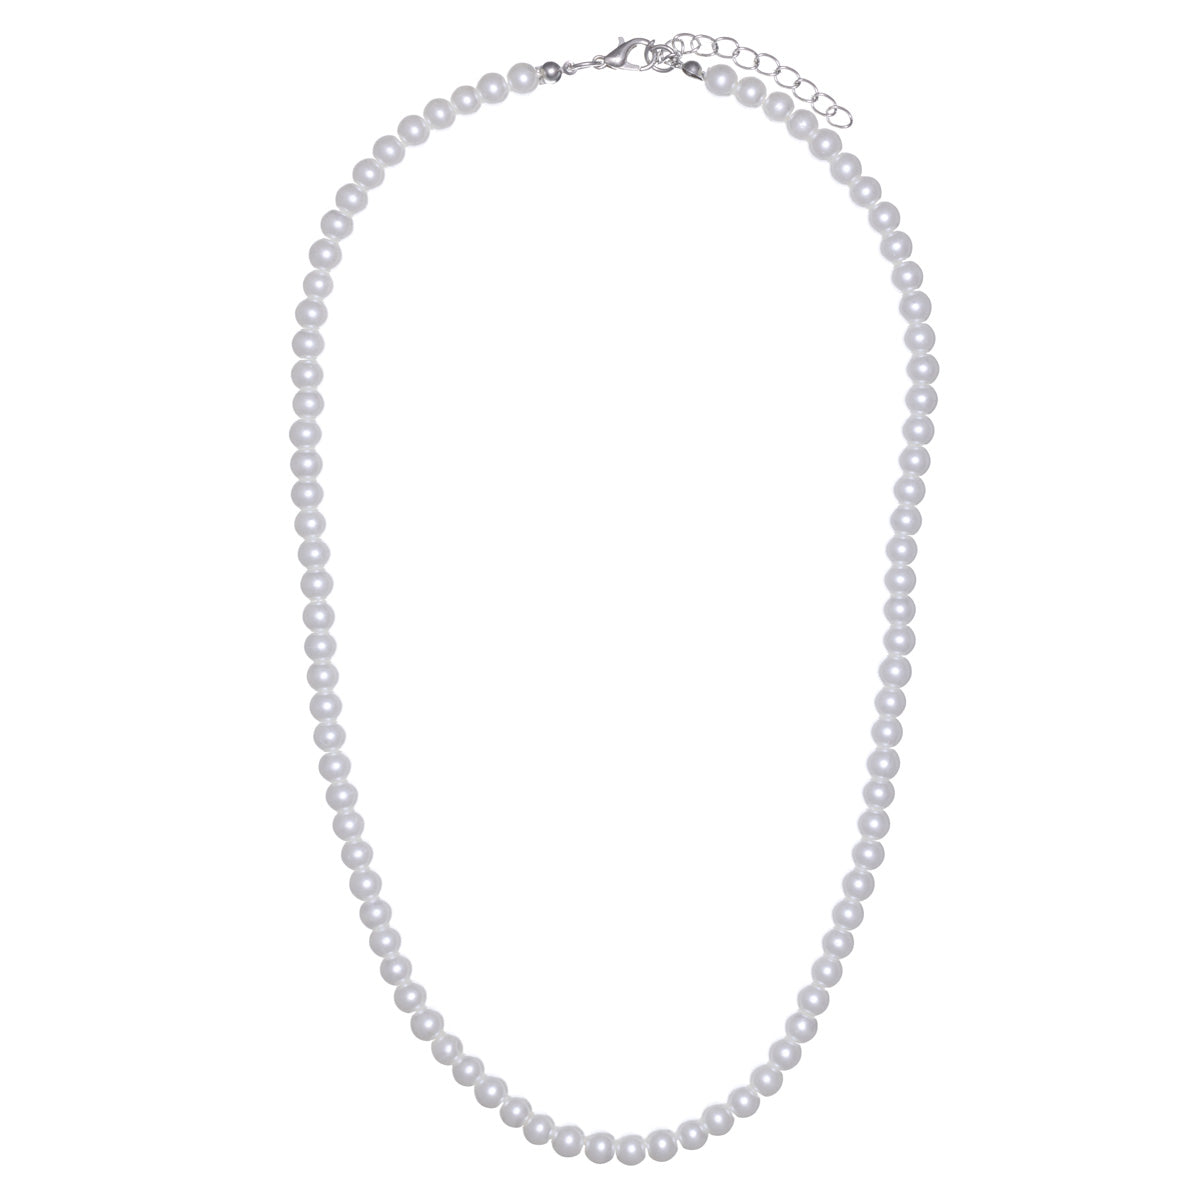 Pearl necklace necklace with beads 6mm 49cm +5cm